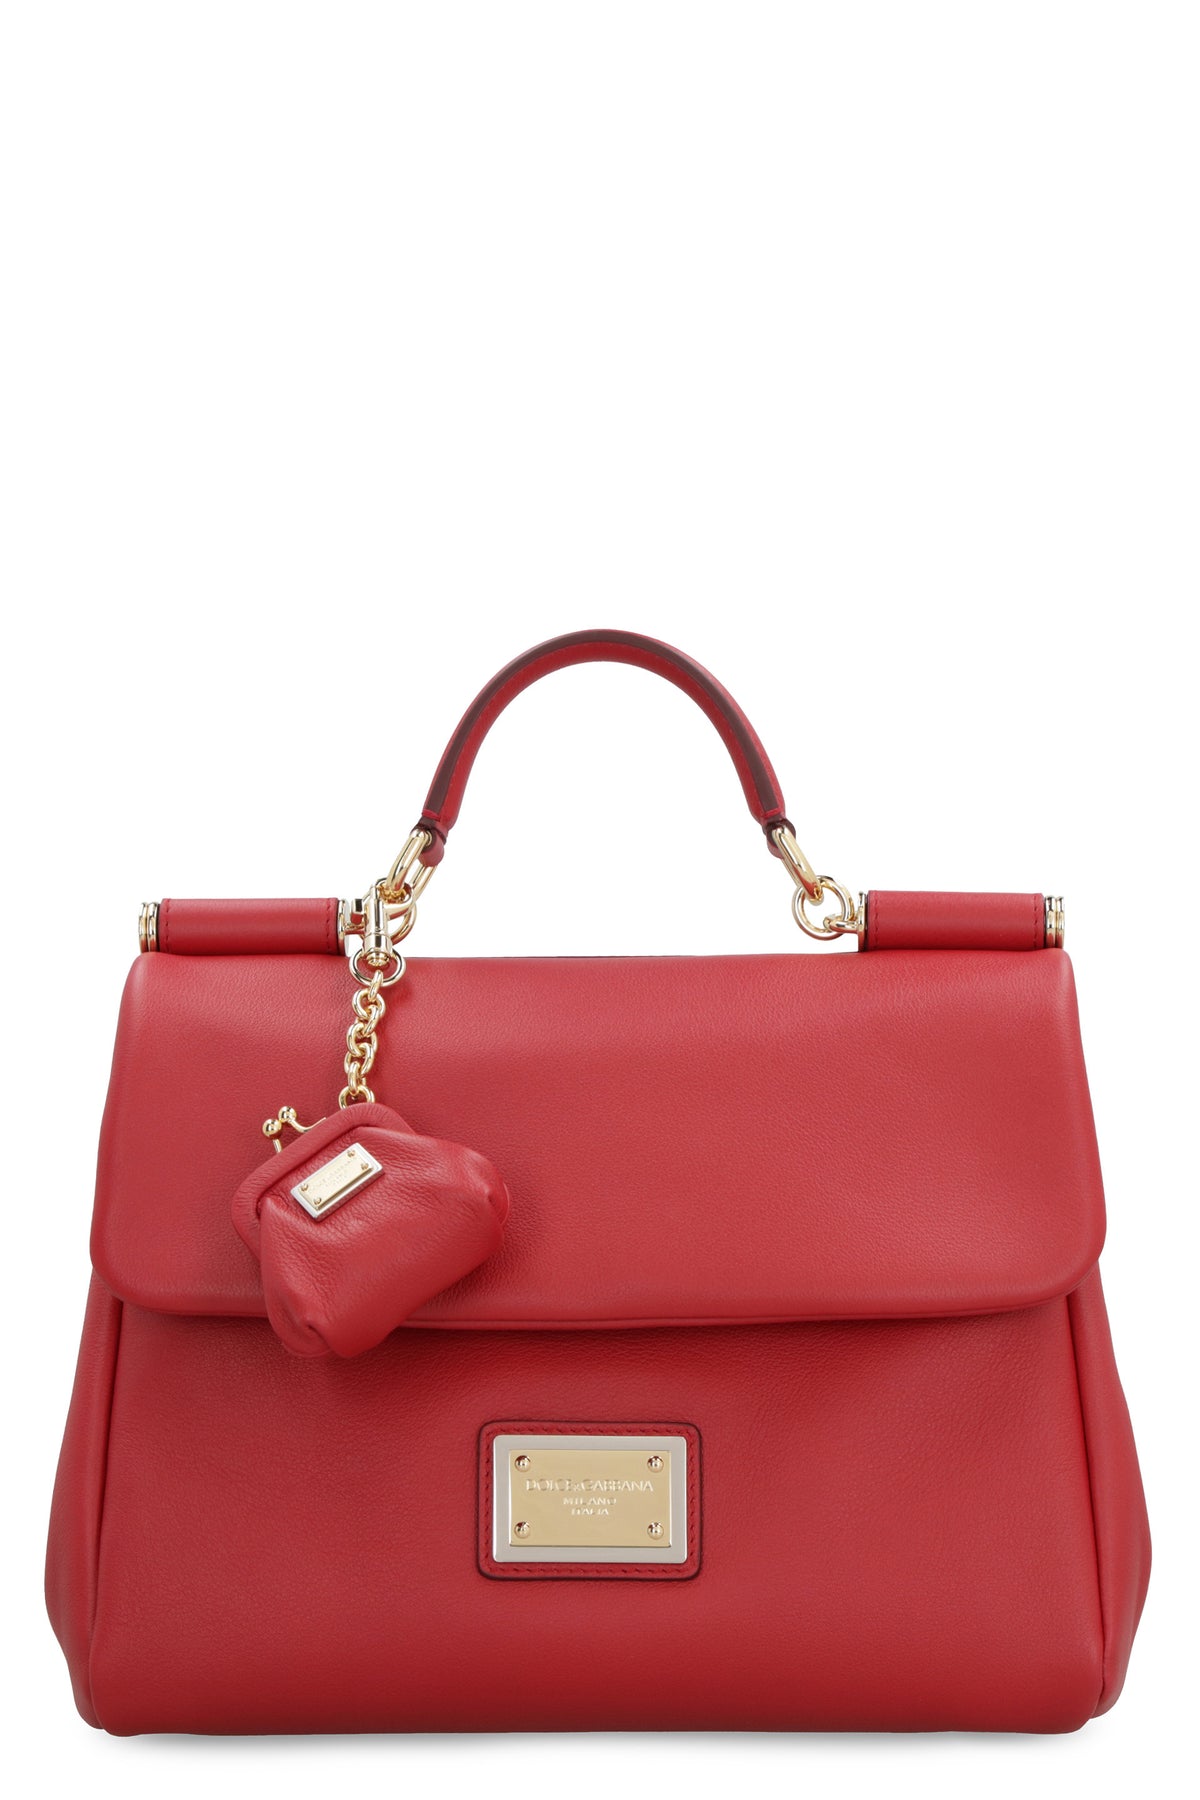 Dolce & Gabbana Leather Bag MISS SICILY Mini Green Red